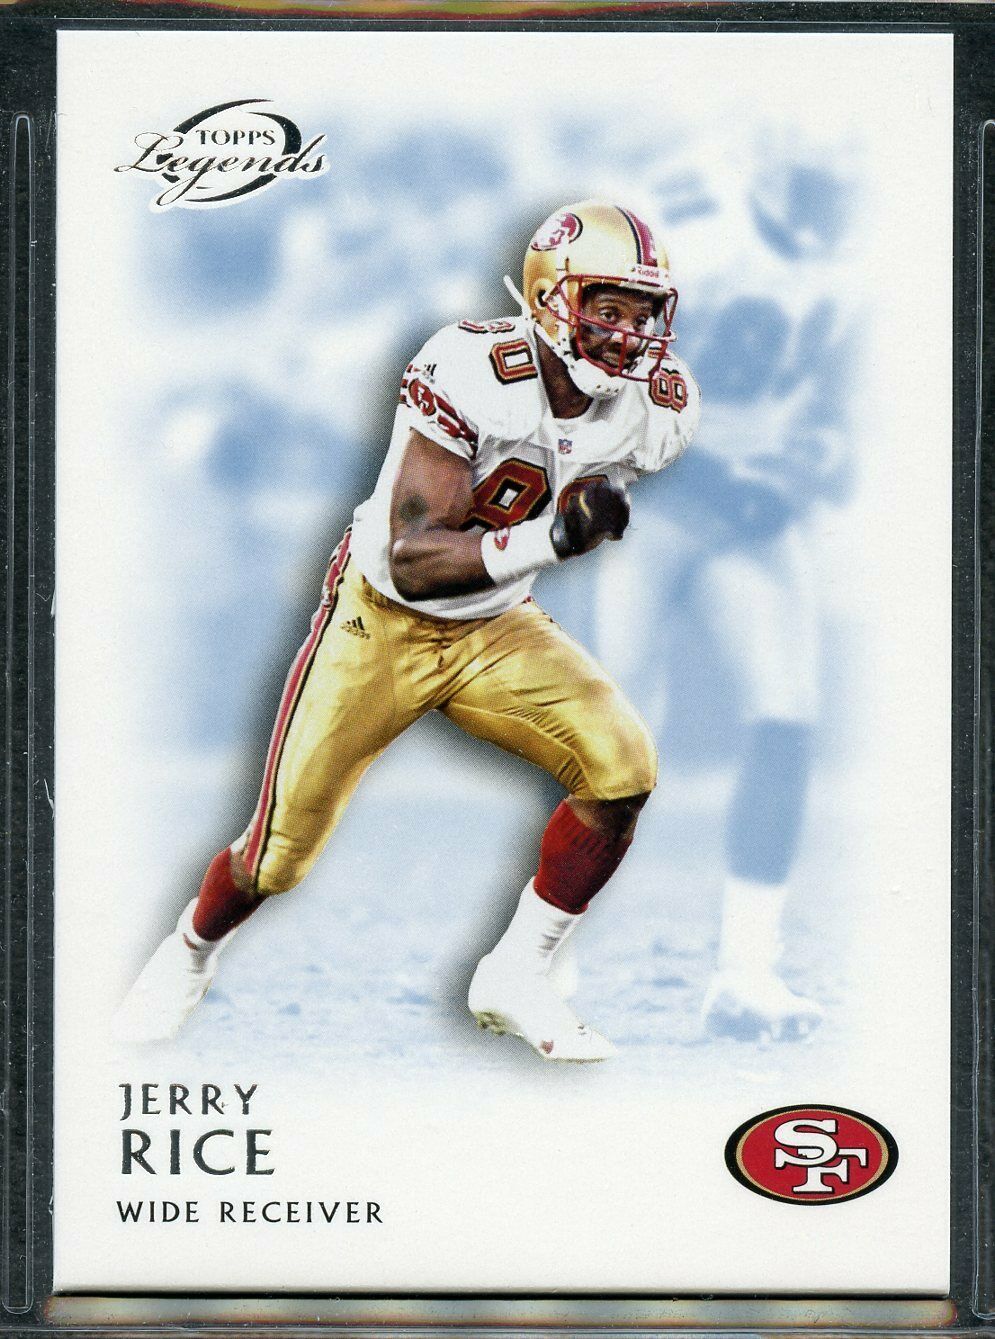 Jerry Rice 2011 Topps Legends BLUE Parallel Series Mint Card #150